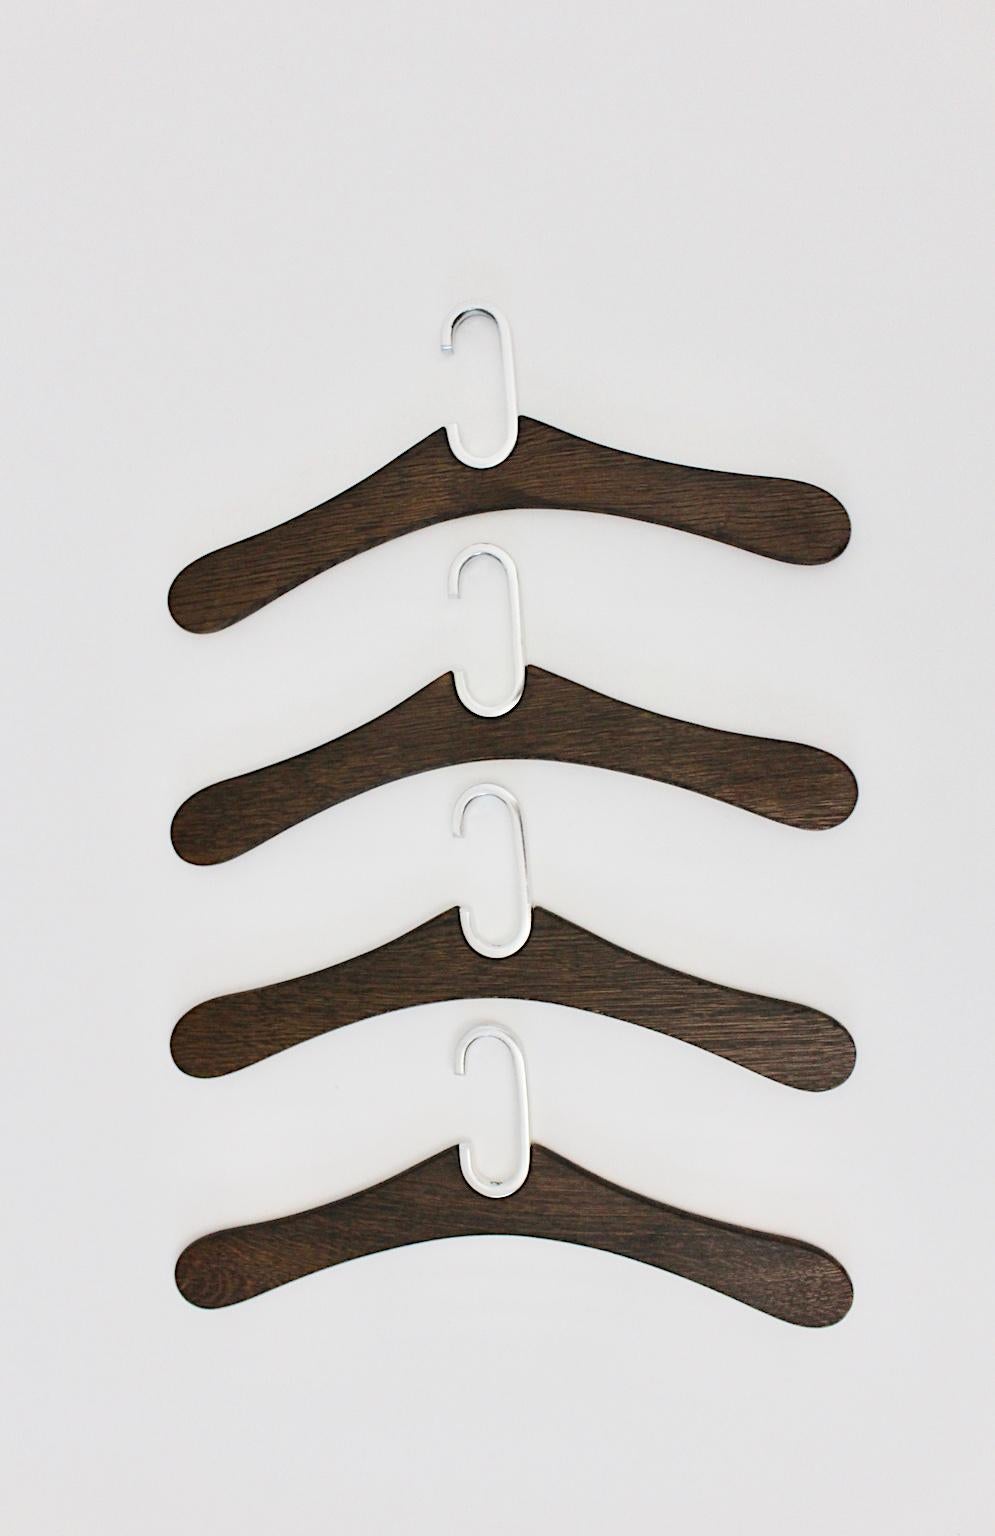 Modernist Vintage Set of Six Oak Cloth Hangers, Austria, 1970s In Good Condition For Sale In Vienna, AT